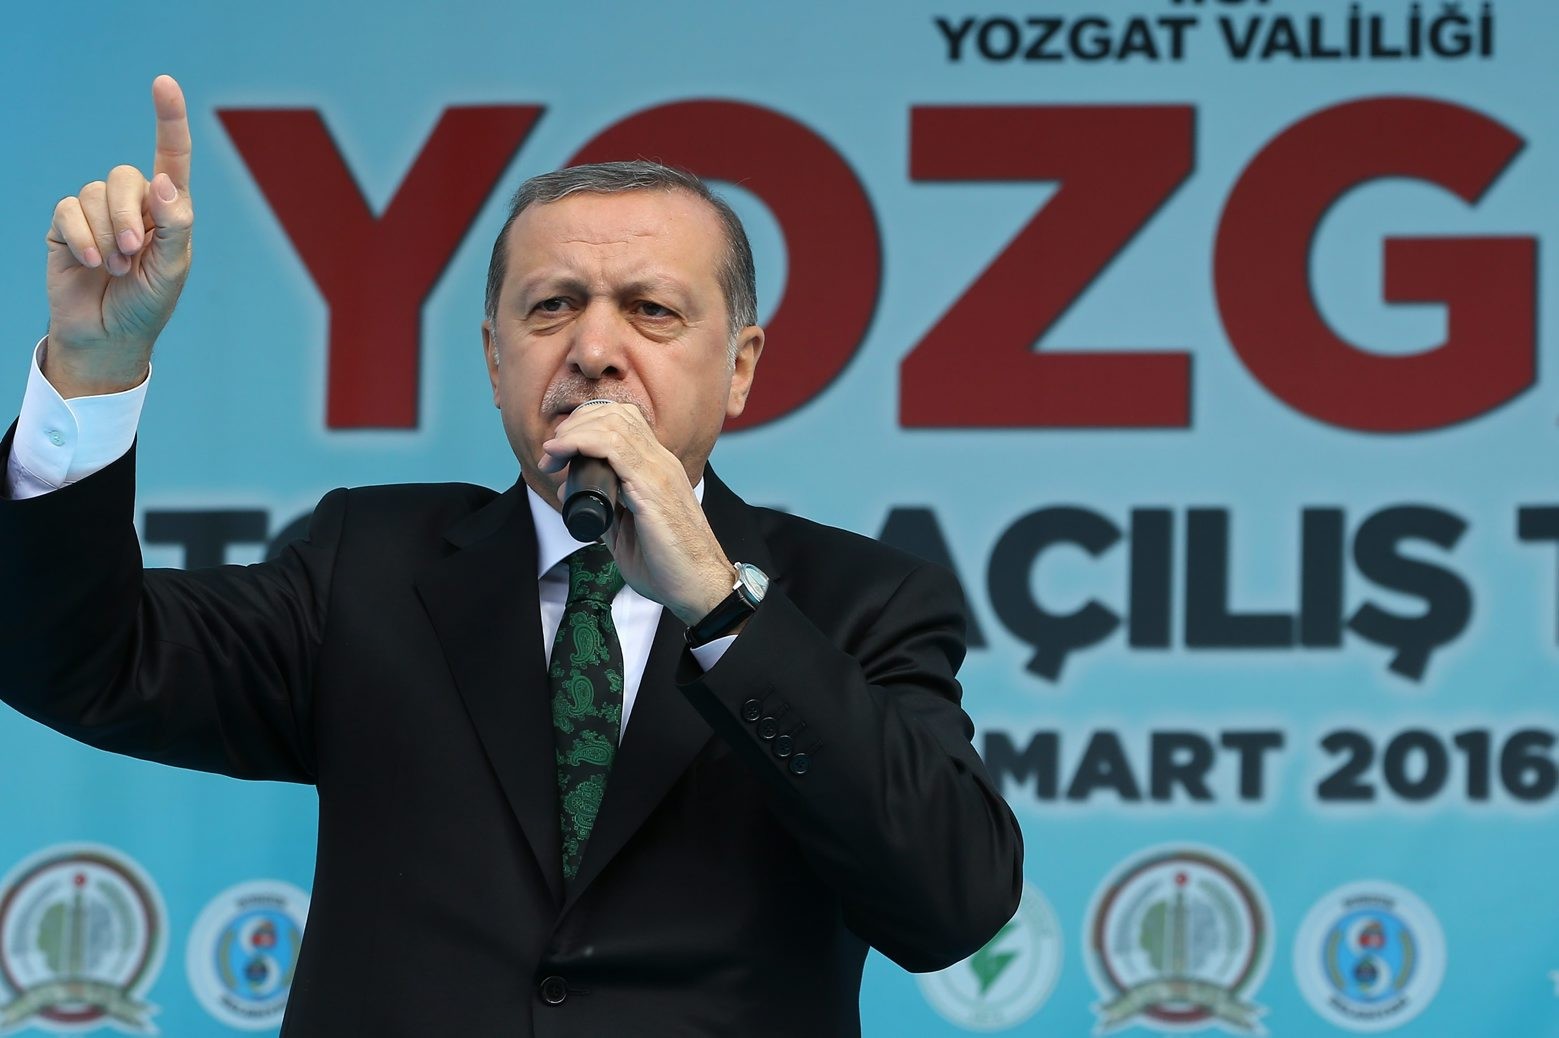 Turkish President Recep Tayyip Erdogan addresses a meeting in Sorgun, Yozgat, Turkey, Friday, March 25, 2016. Erdogan has criticized the Belgian authorities as "incapable" for not taking any action against one of the Brussels attackers after he was detained at the border with Syria and deported from Turkey. (AP Photo) Turkey Belgium Attacks